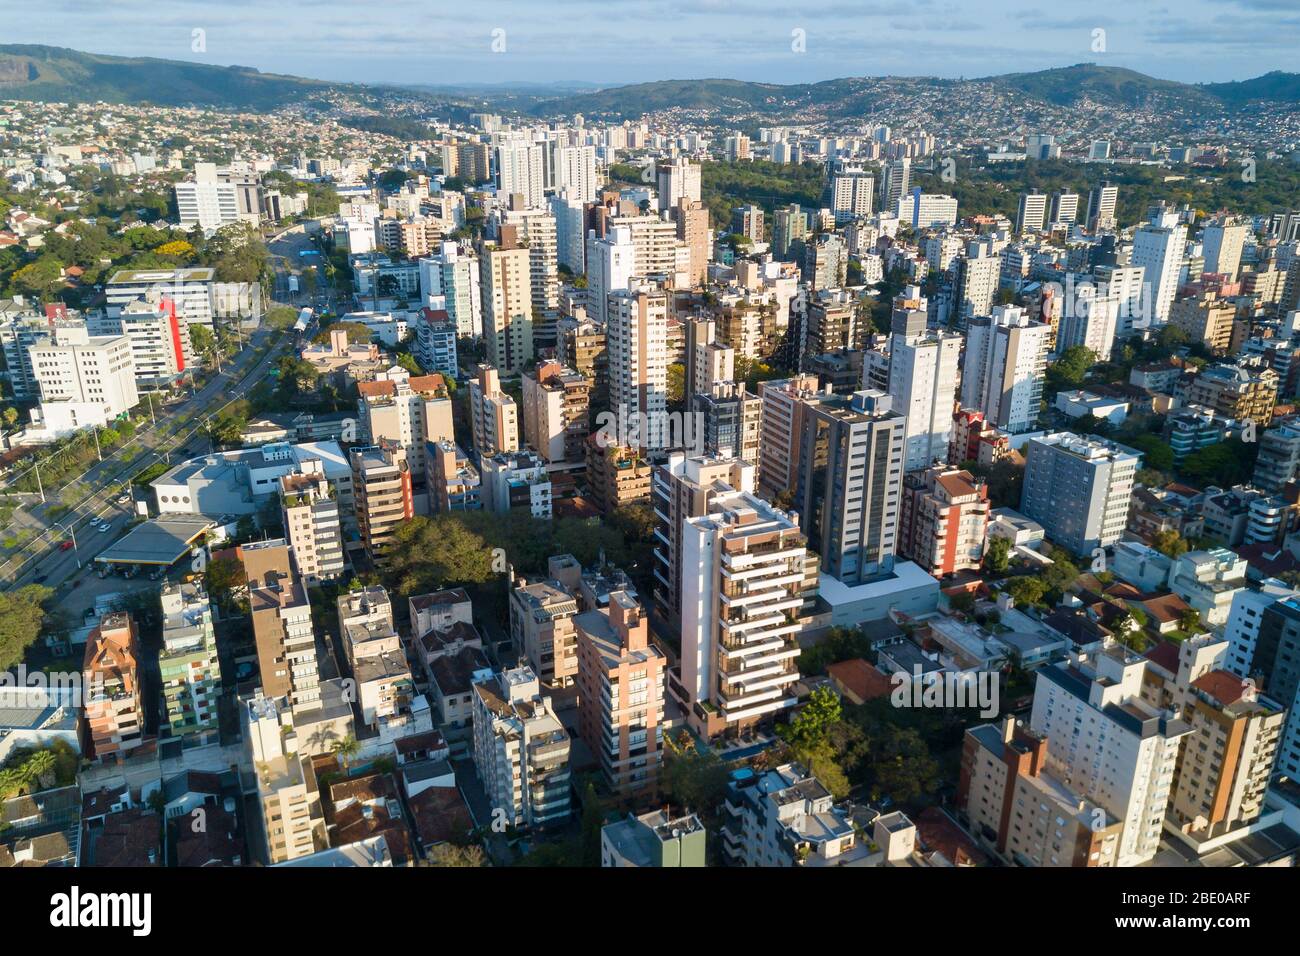 Porto Alegre, RS, Brazil drone view. Petropolis neighborhood, an upper class area with residential and commercial buildings. Aerial view. Stock Photo